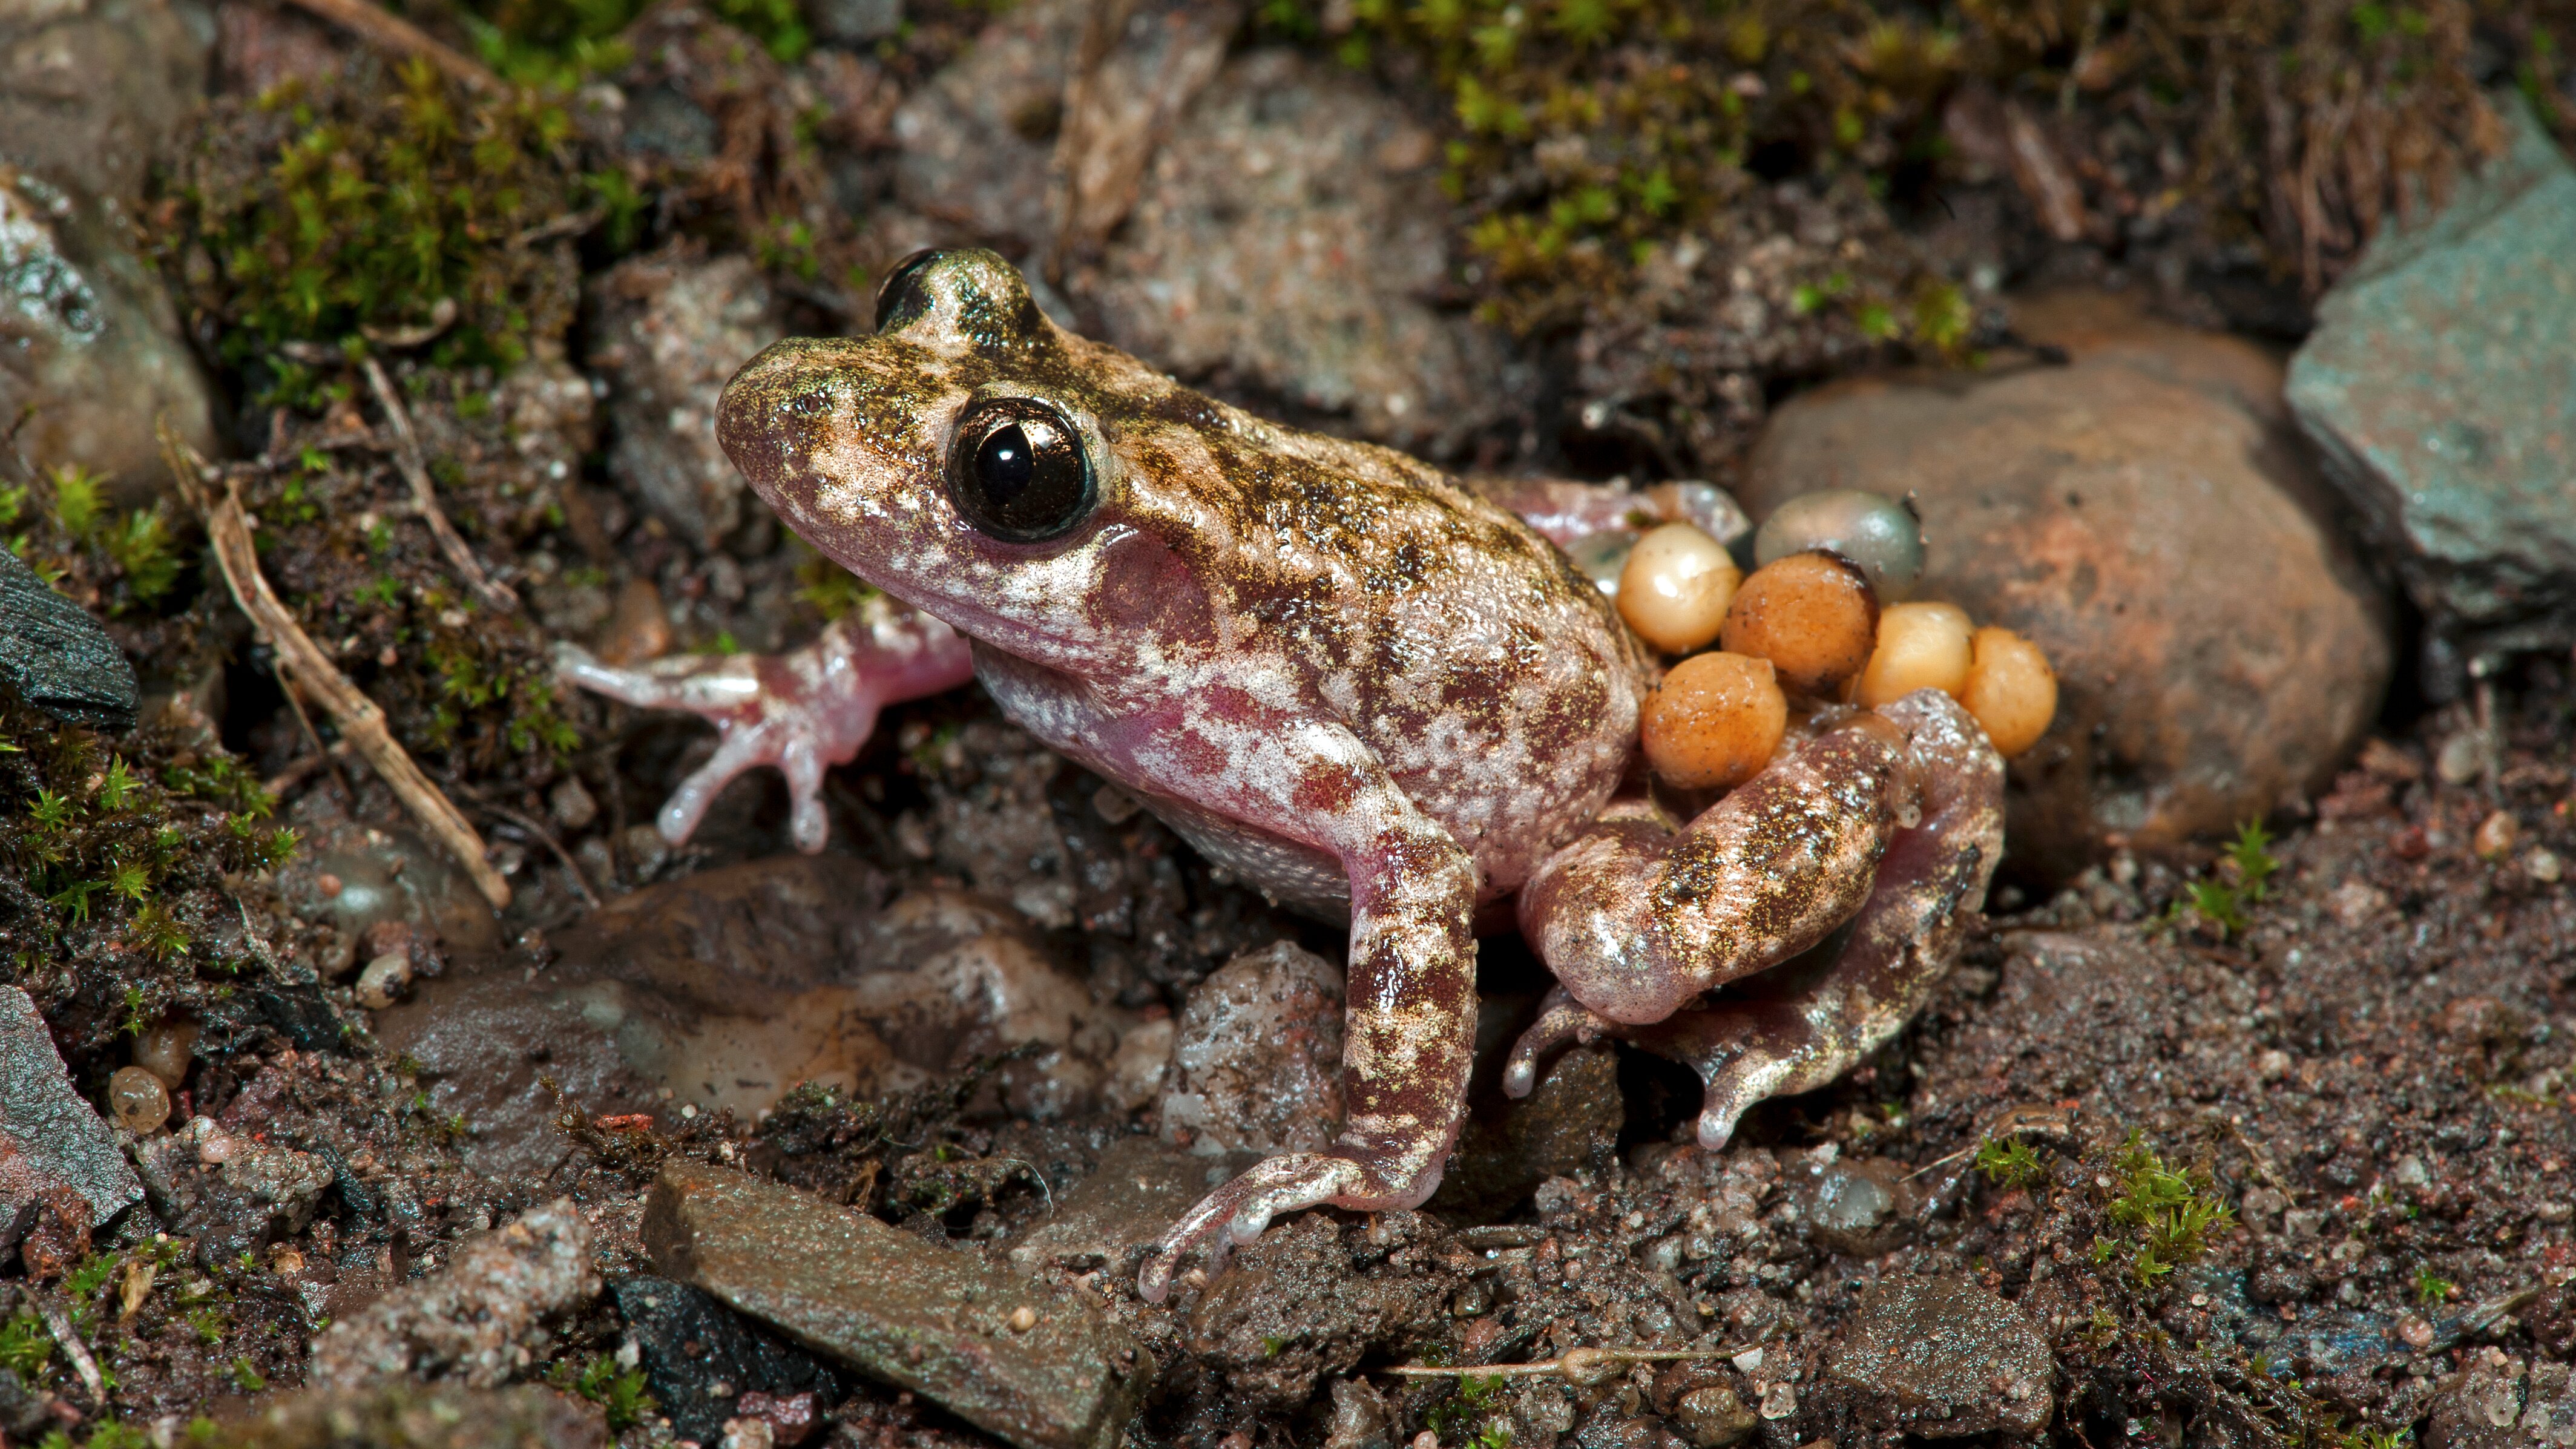 Thanks to rigorous veterinary screening, outbreaks of the frog fungus Bd in Majorcan midwife toads have been detected and contained. | Benny Trapp